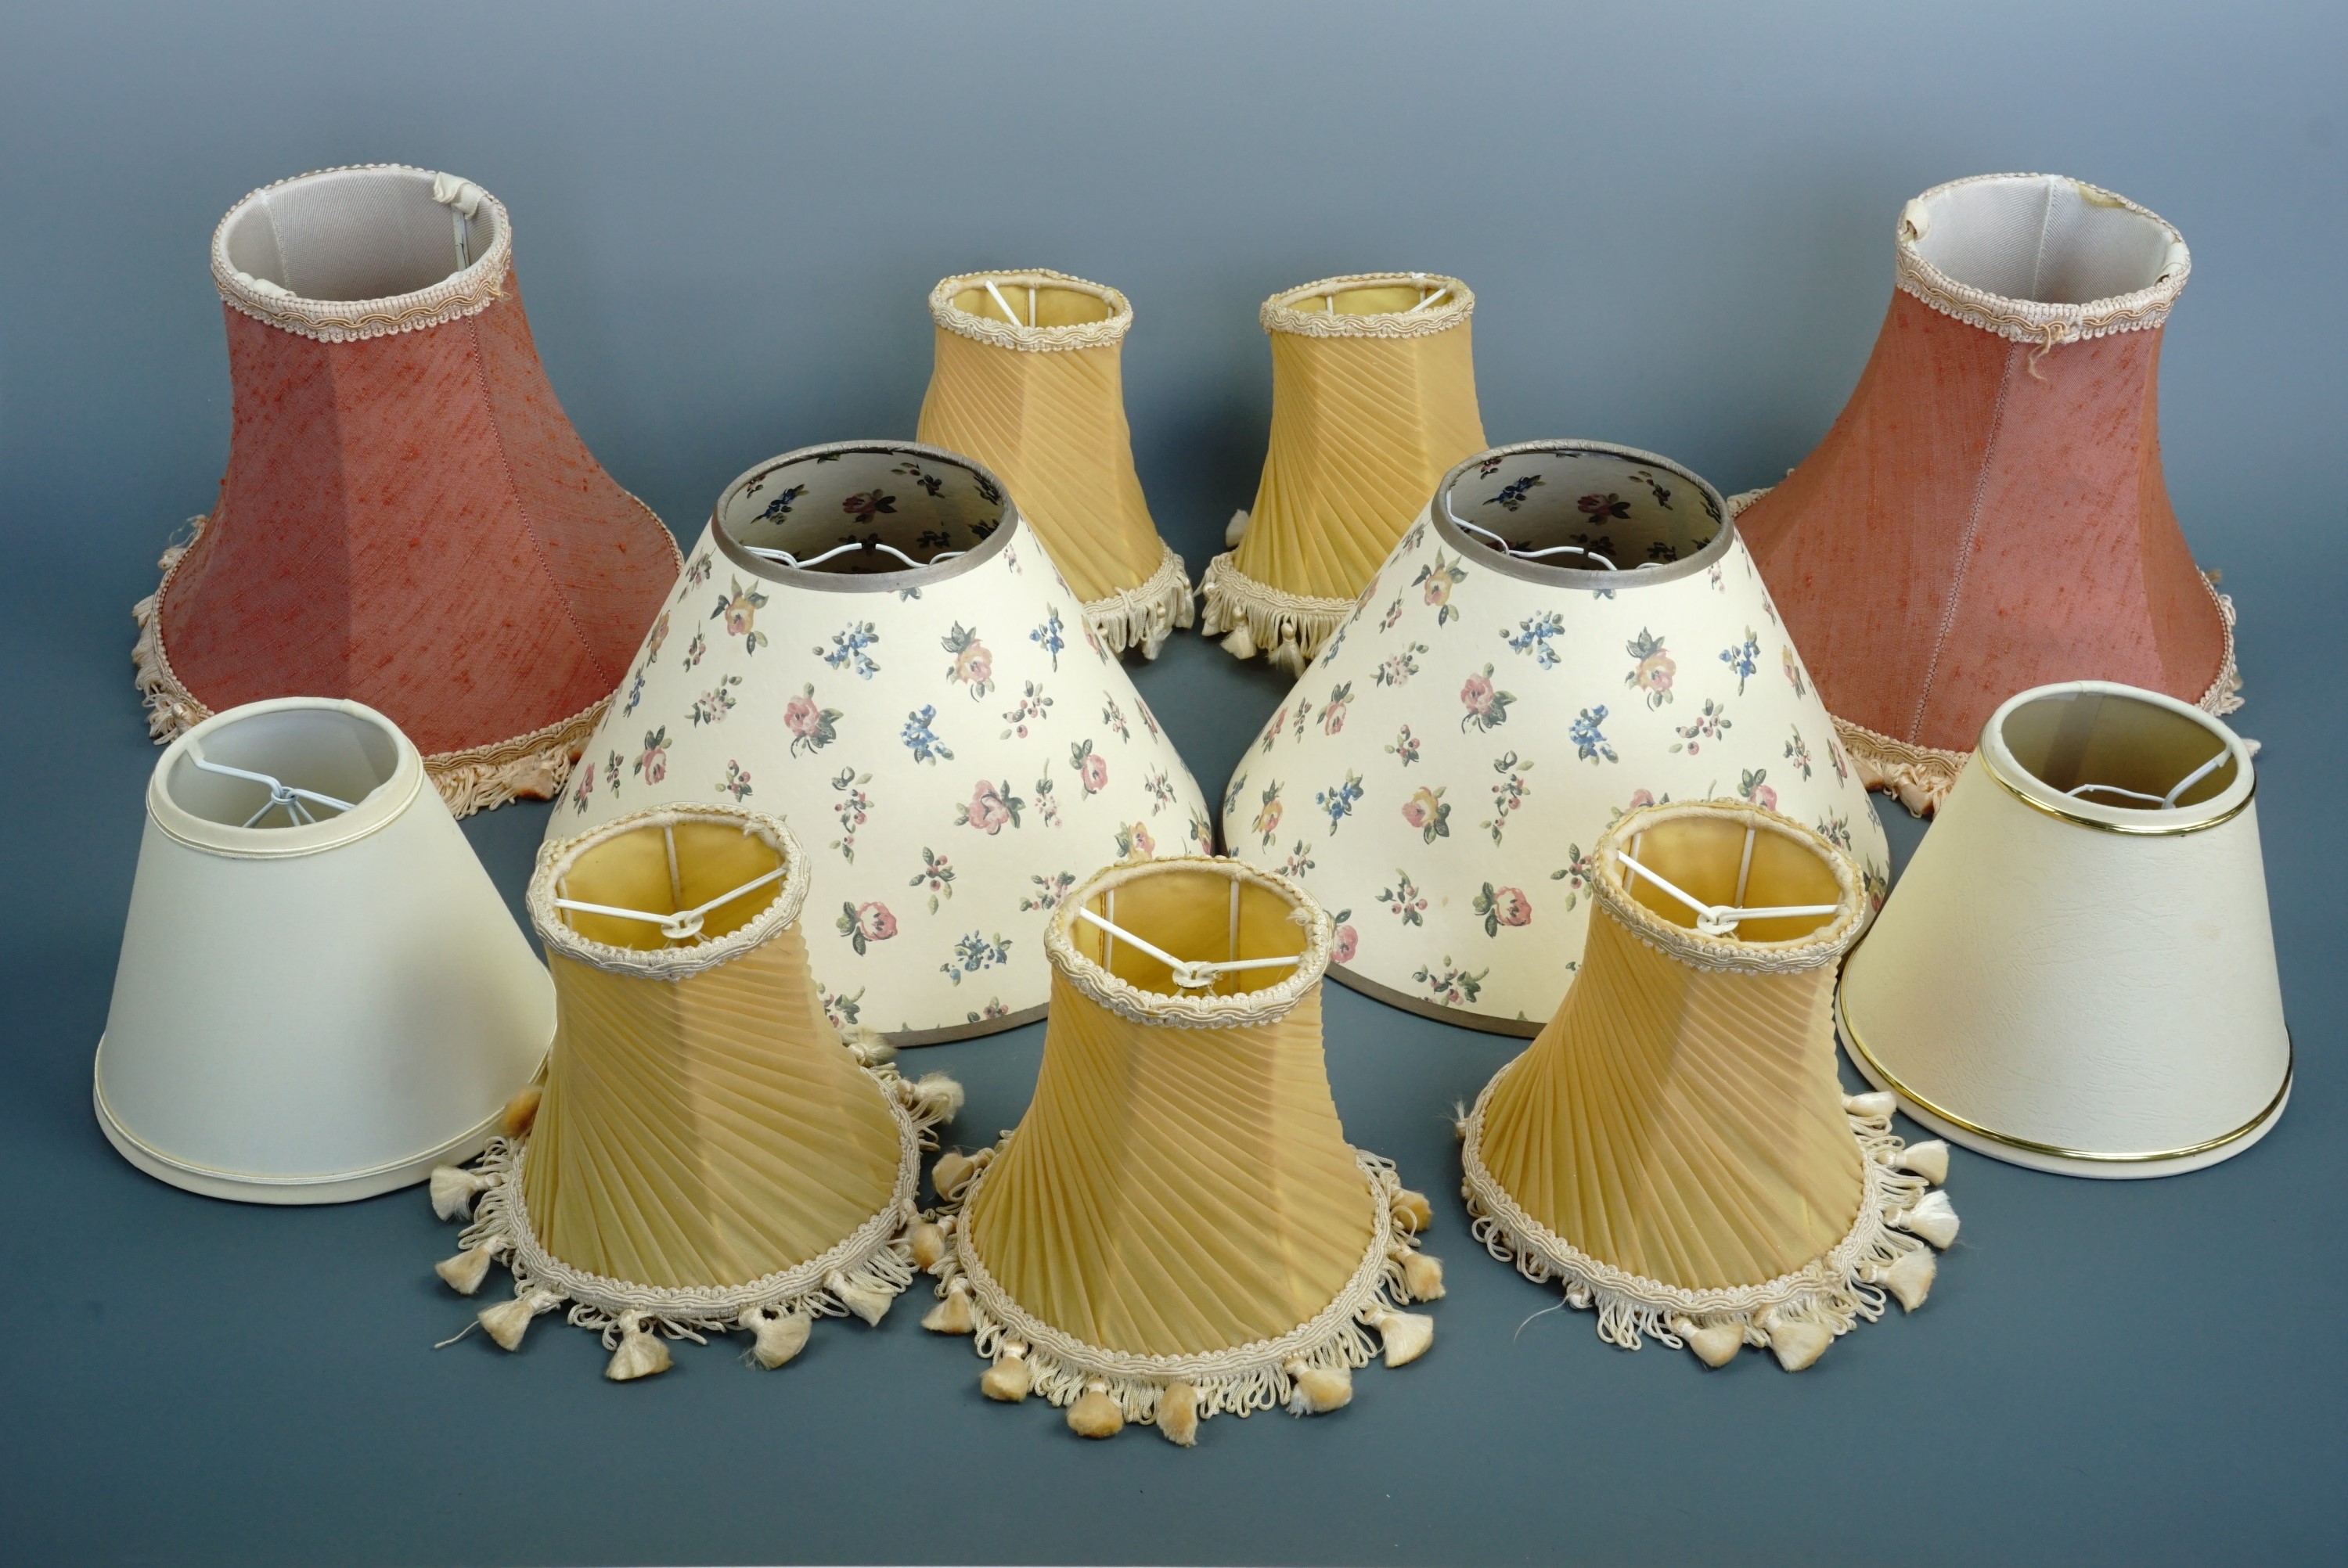 A quantity of small lamp shades suitable for electric girandoles, electroliers and bedside lamps